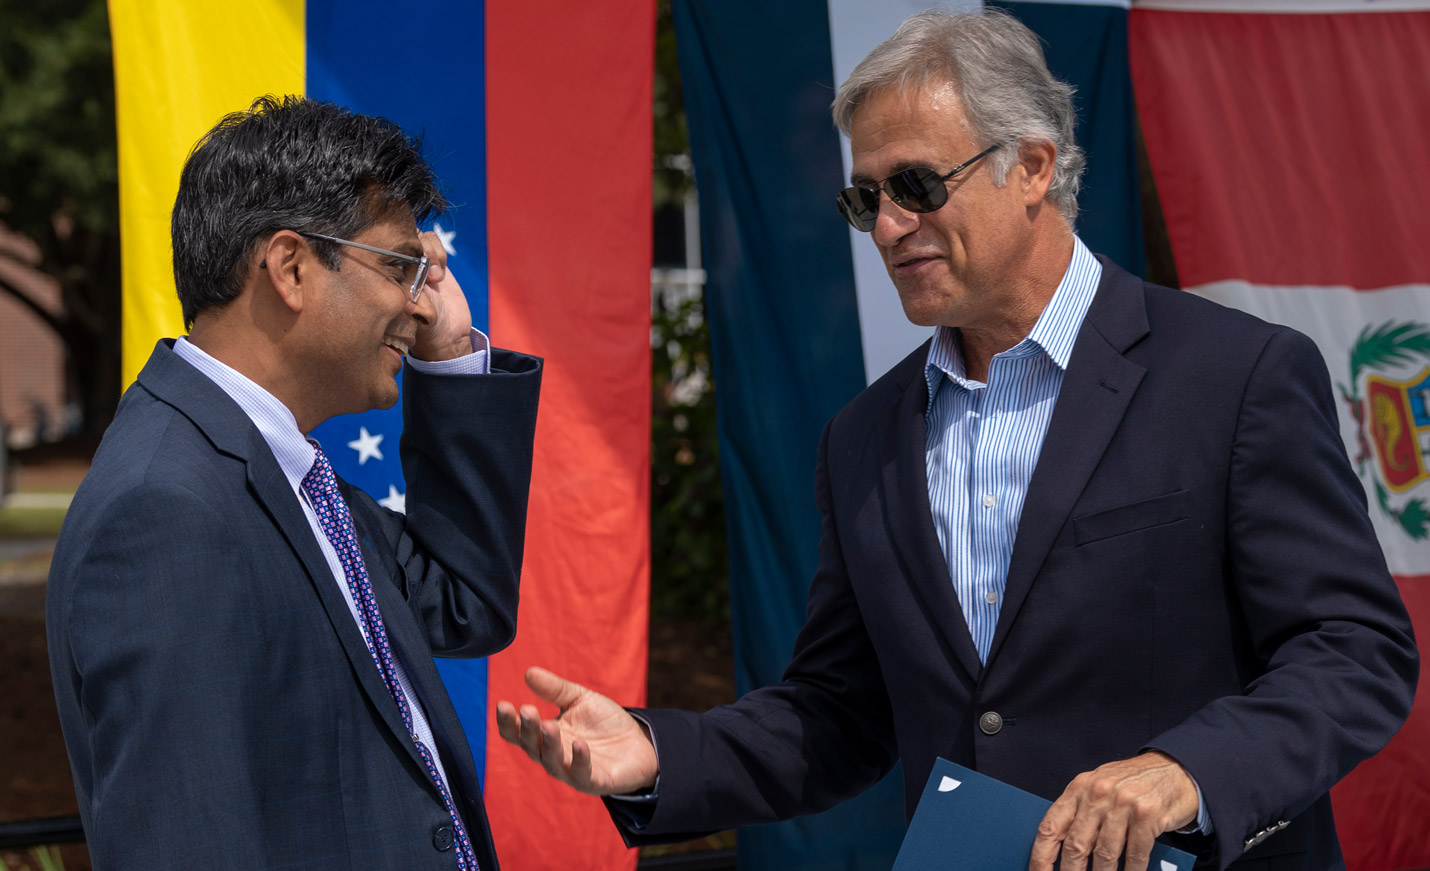 Chancellor Aswani K. Volety and Wilmington Mayor Bill Saffo talk in front of flags representing Latin American nations at the Campus Commons for a Hispanic Heritage Month ceremony.